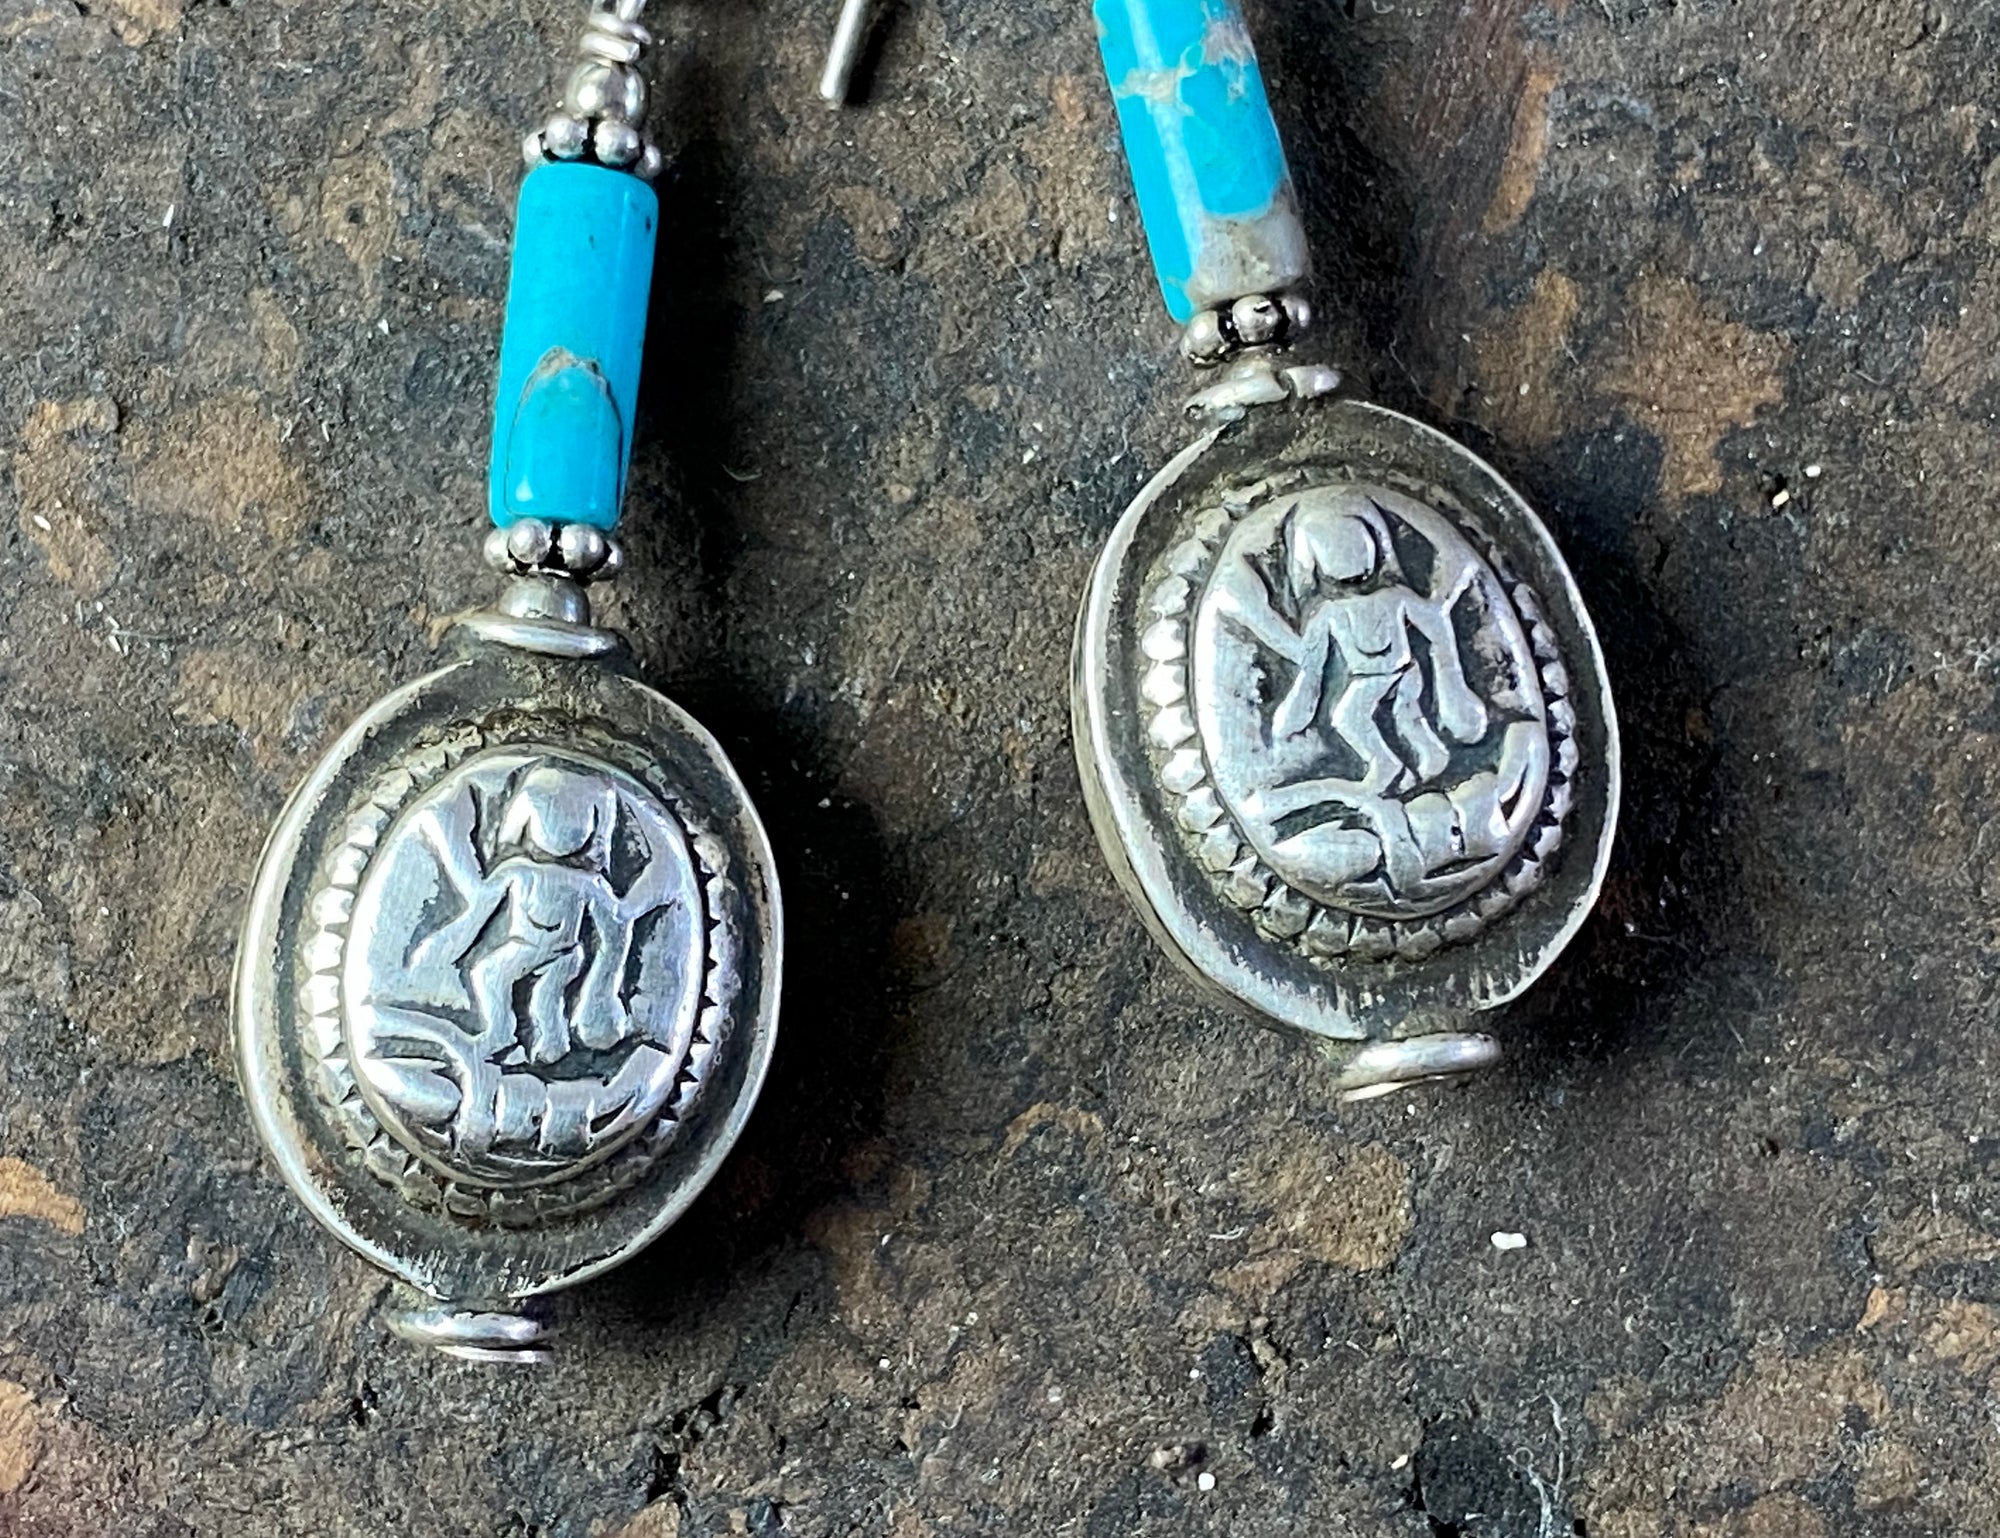 Unique statement earrings featuring genuine turquoise and vintage silver beads from india featuring an image of Lakshmi, goddess of wealth and prosperity